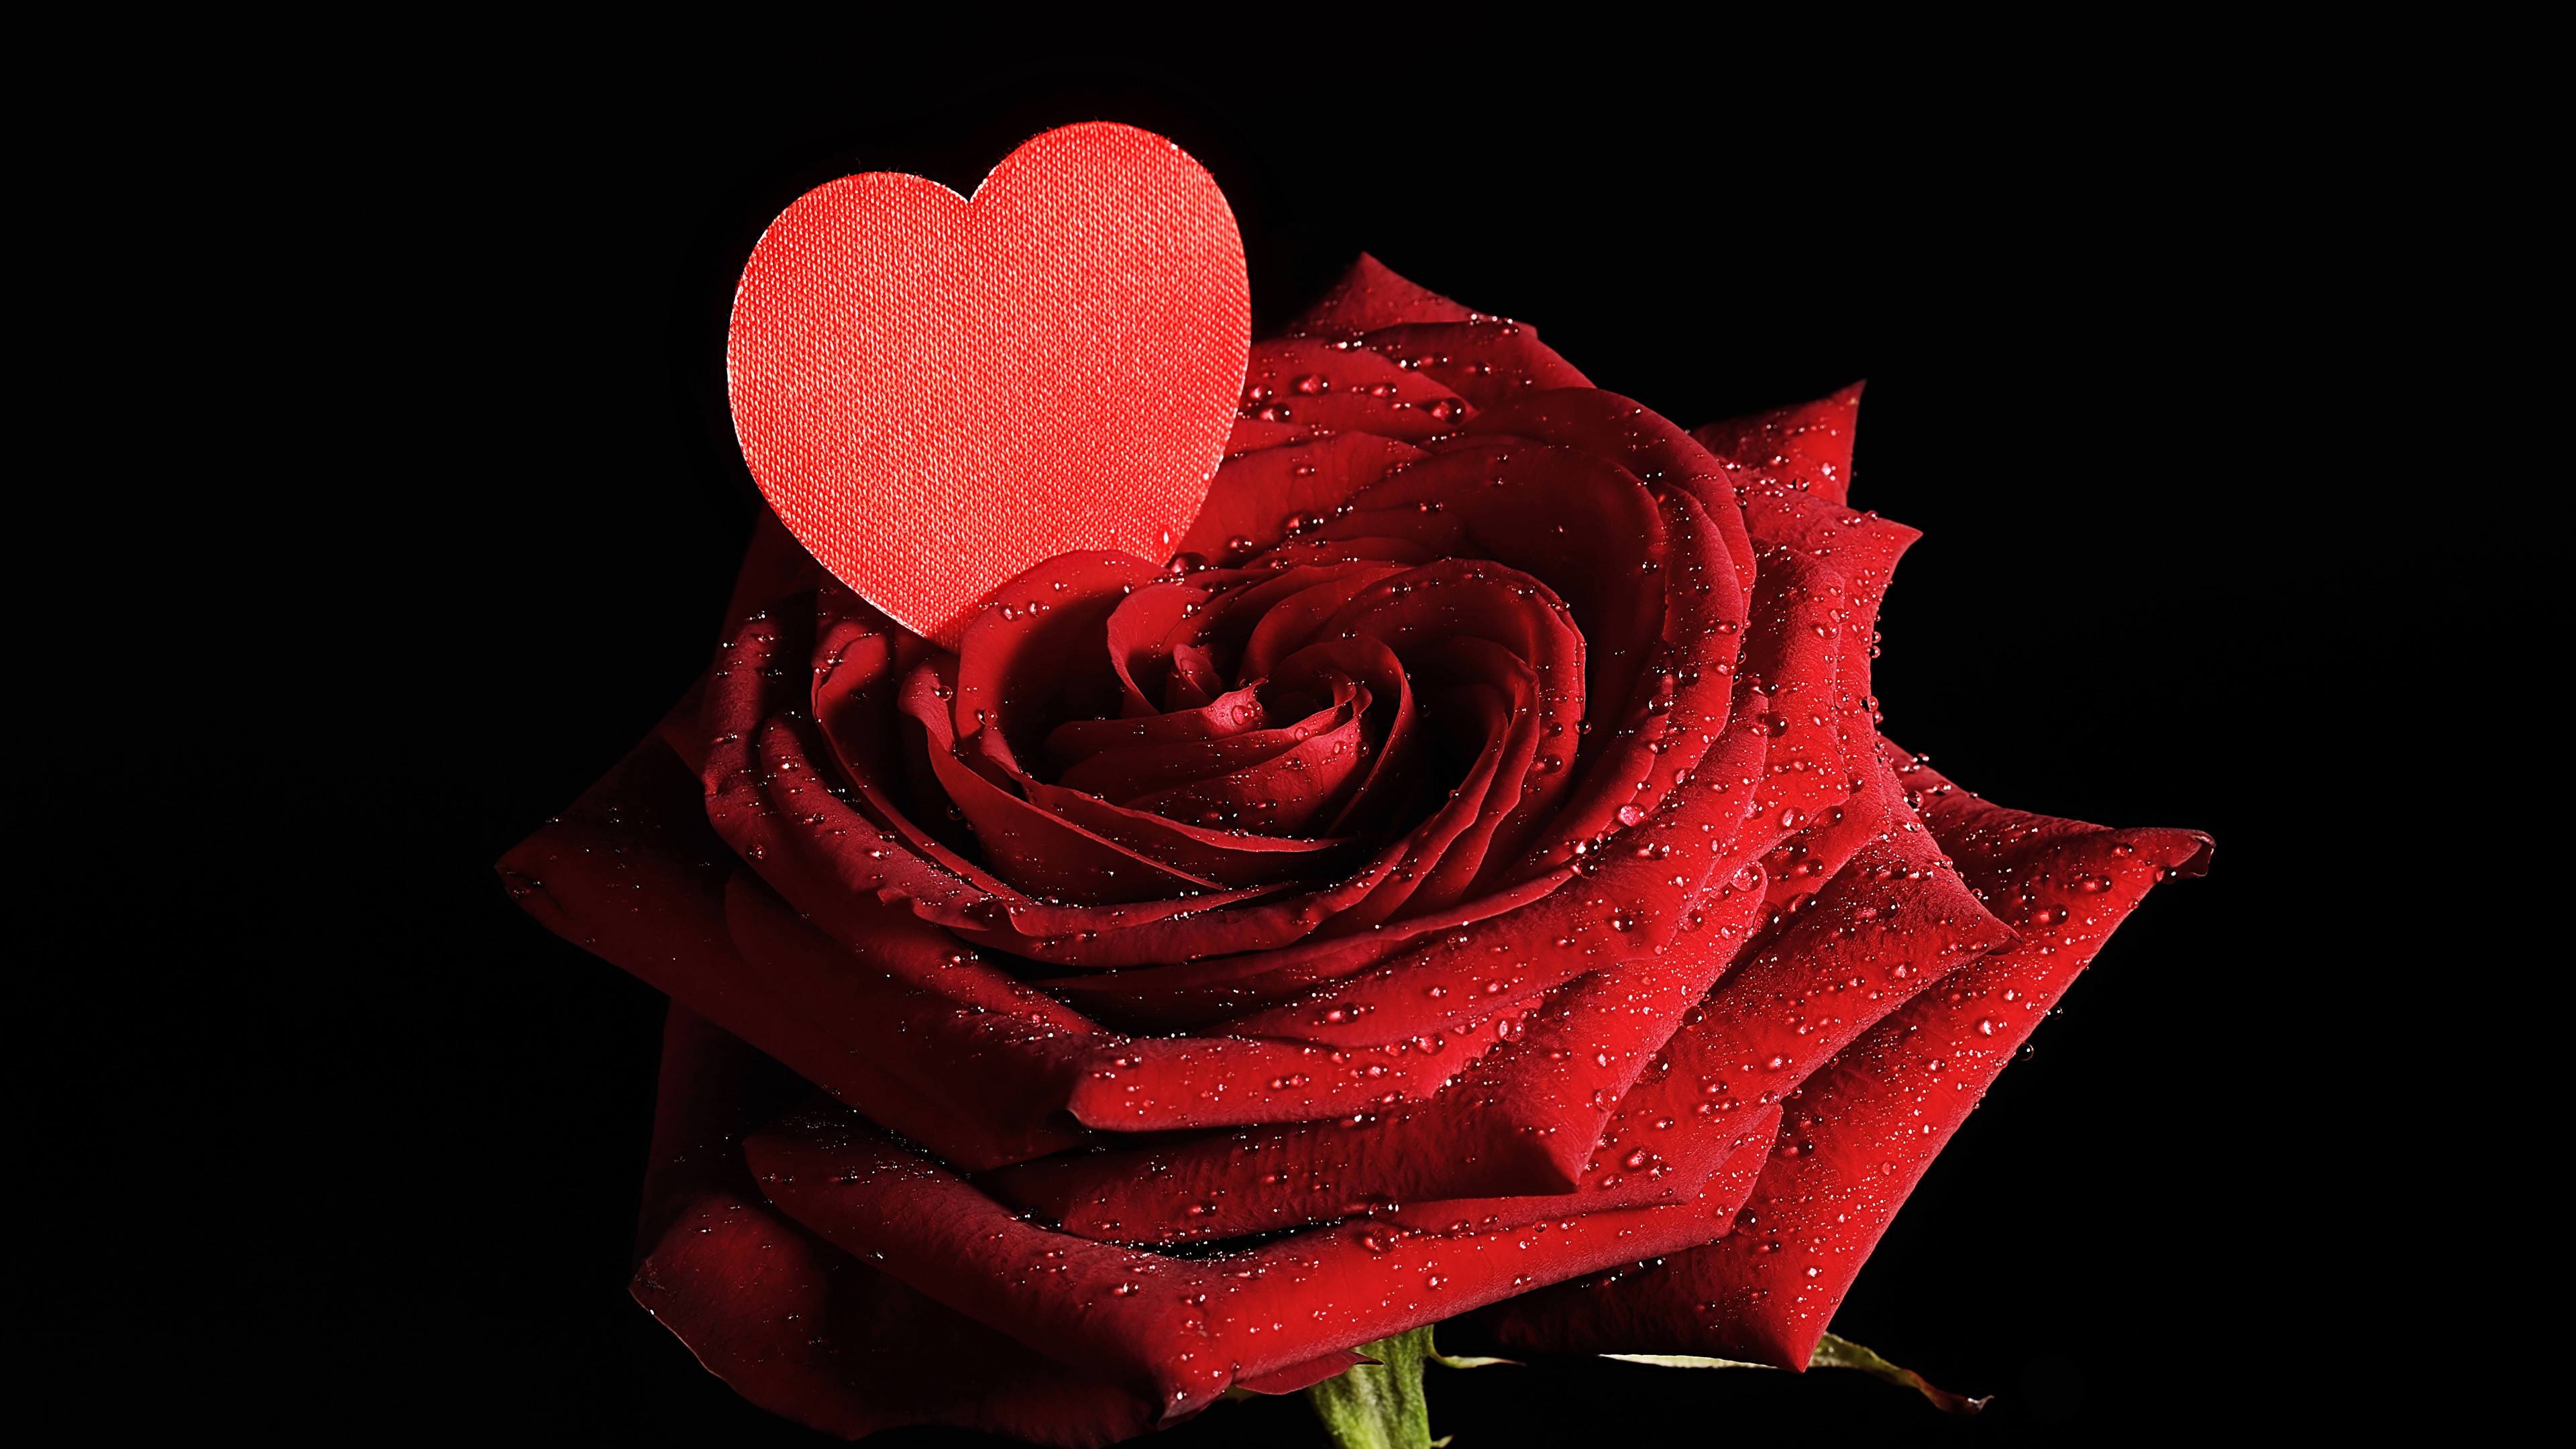 3840x2160 Wallpapers Valentine's Day Heart Red Roses Drops Flowers Black background  